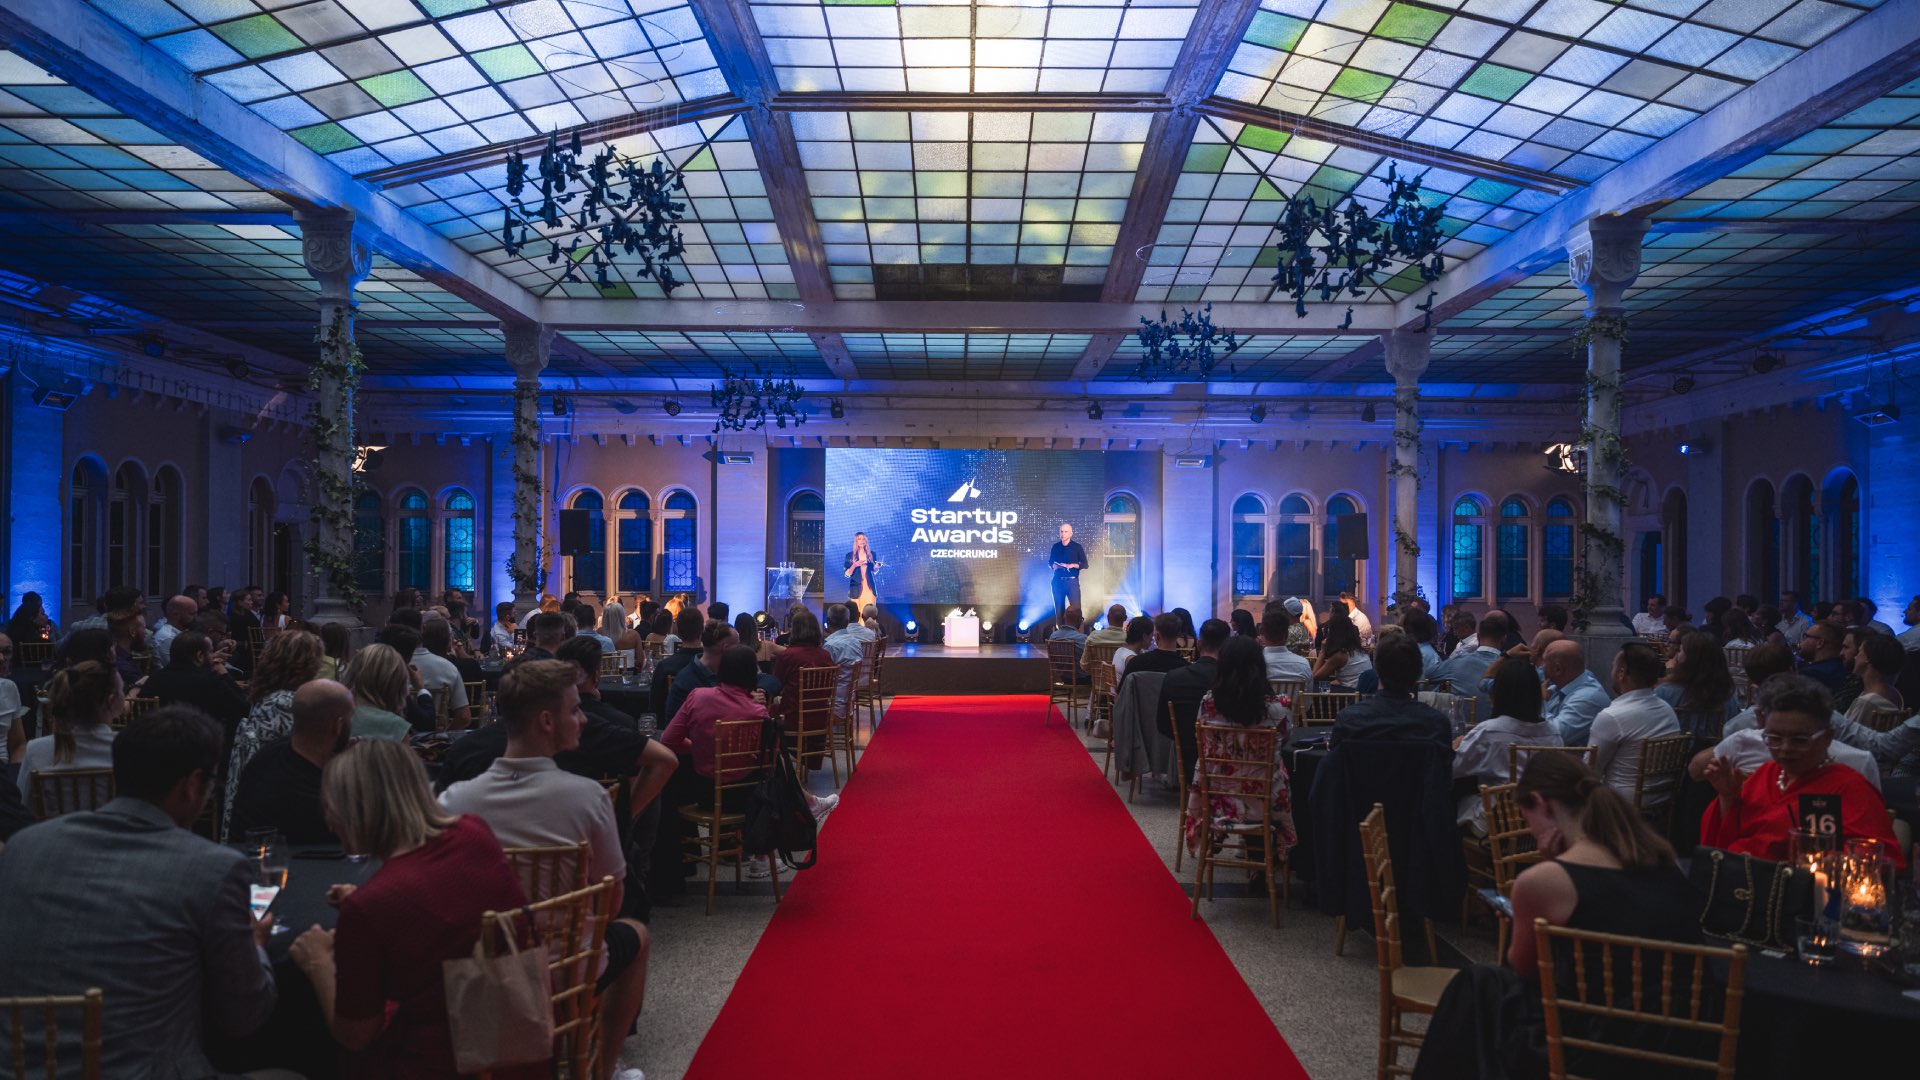 Startup Awards 2023 in photos: Personalities, networks and drones